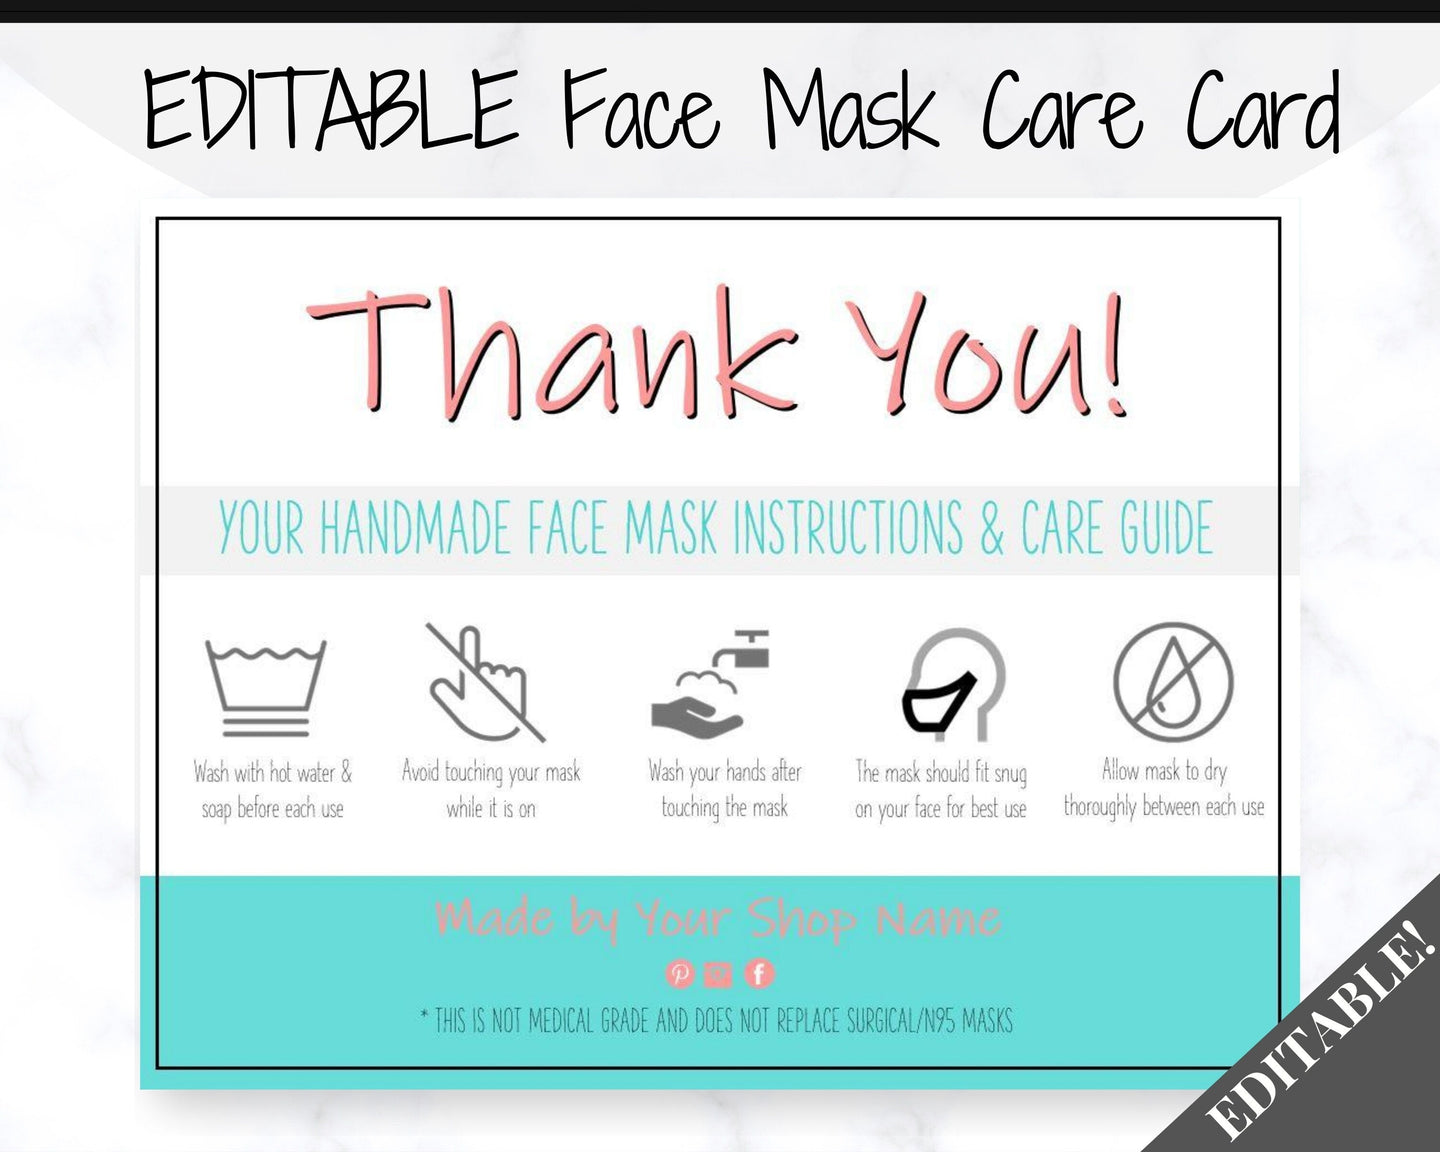 EDITABLE Face Mask Label Care Card, THANK YOU for Your Order Card, Face Mask Instructions, Business Labels, Mask Seller, Package Label Tag | Aqua & Pink